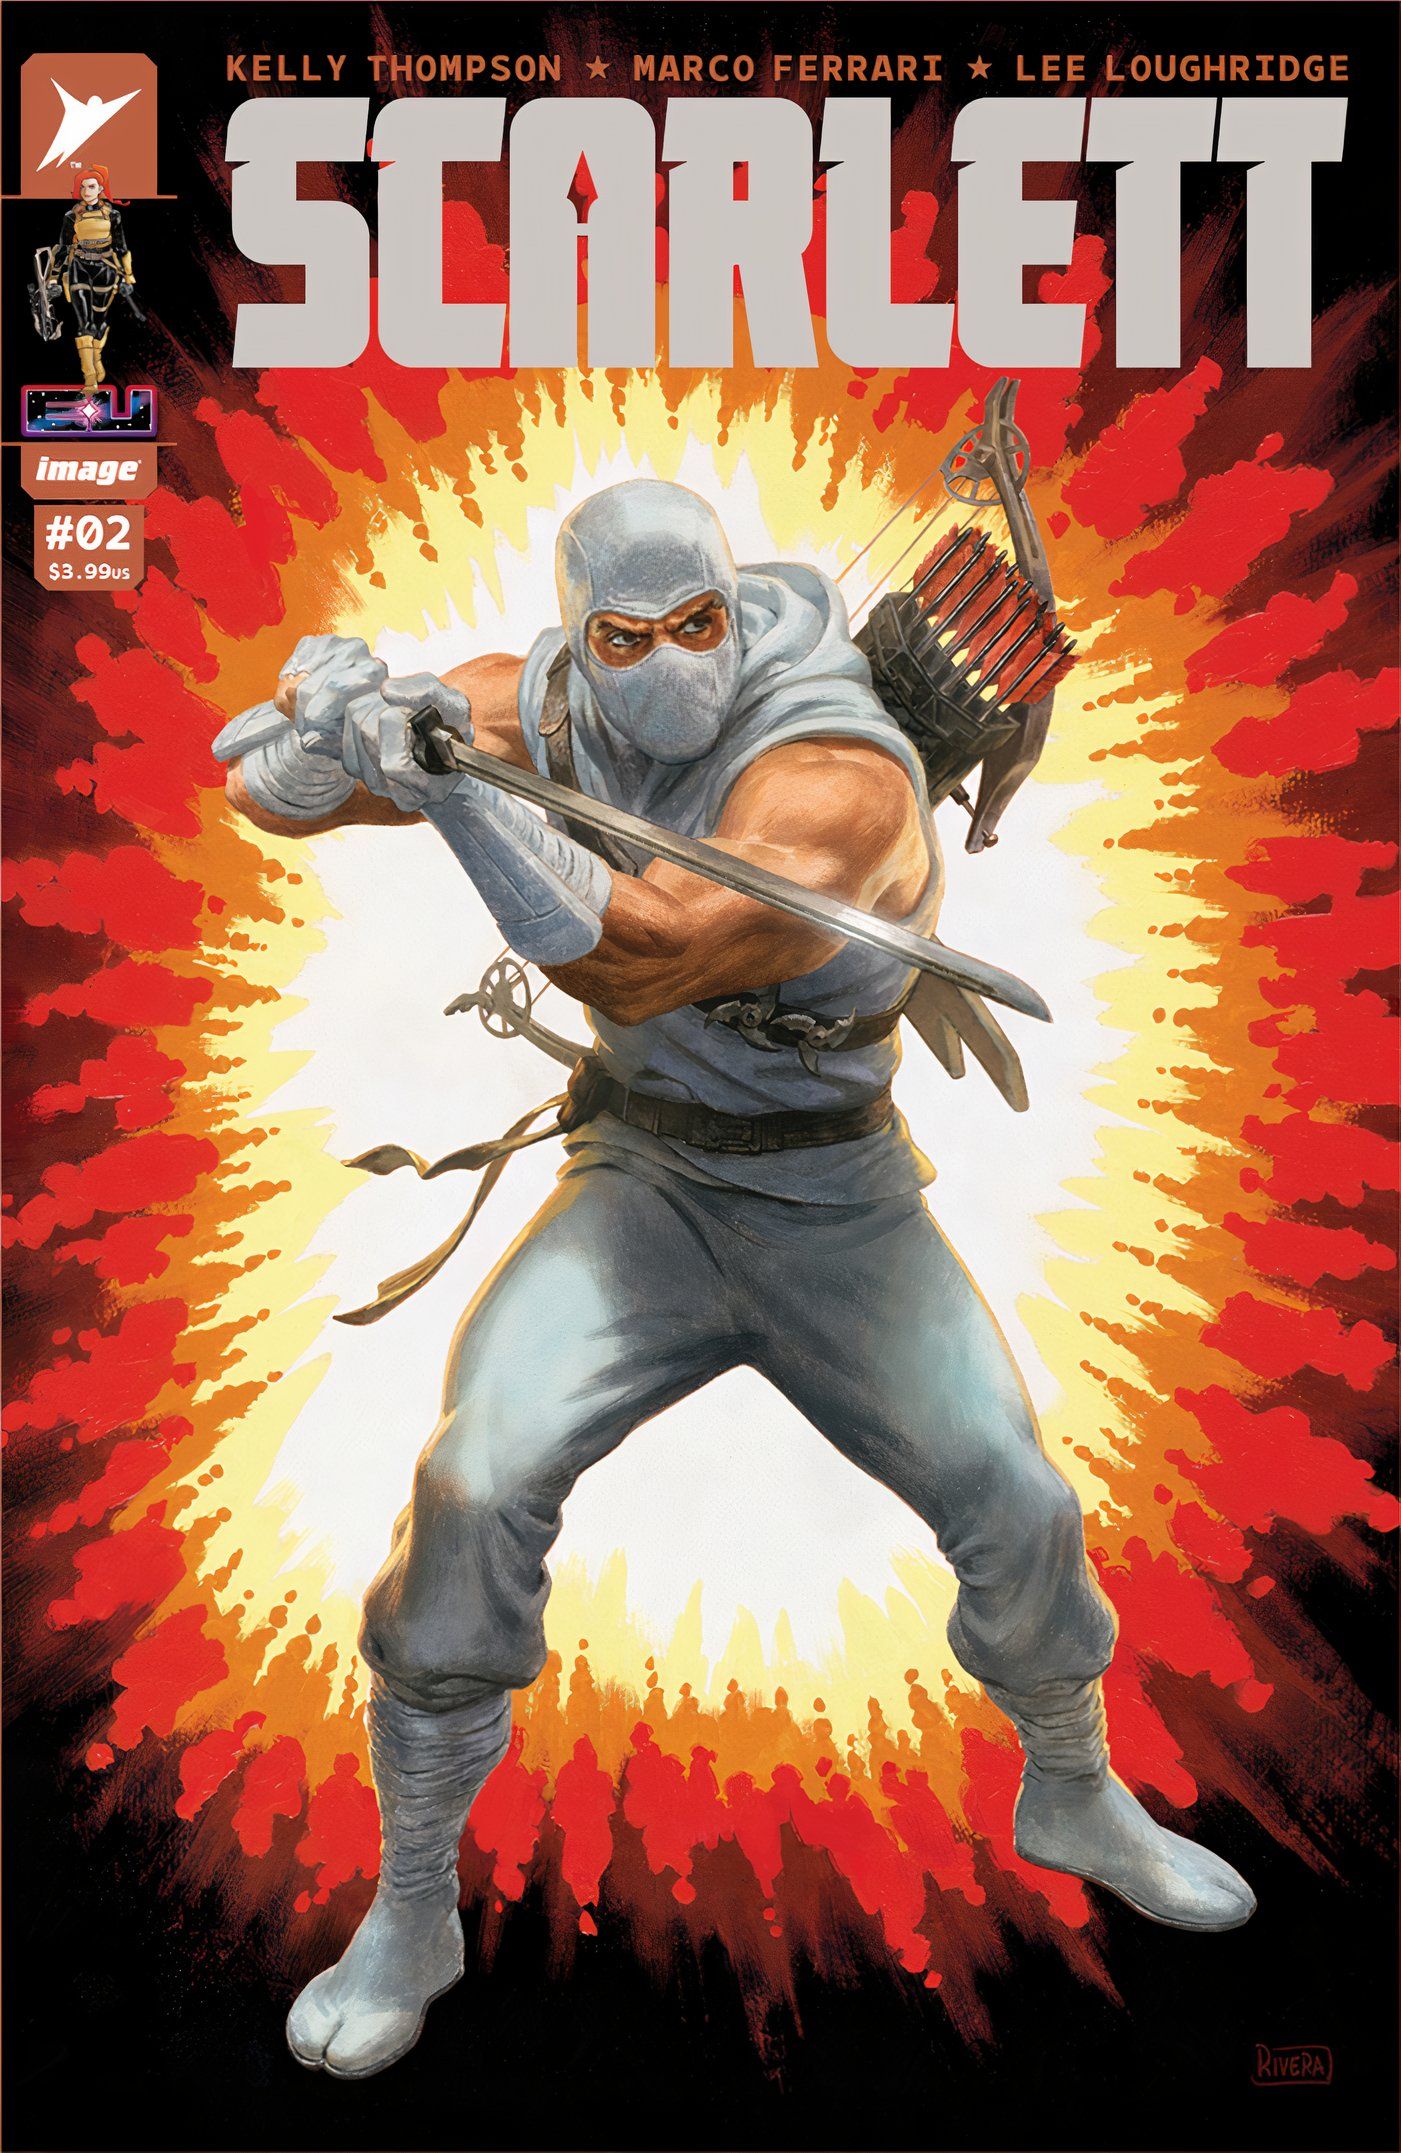 Scarlett #2 variant cover featuring the ninja known as Storm Shadow.